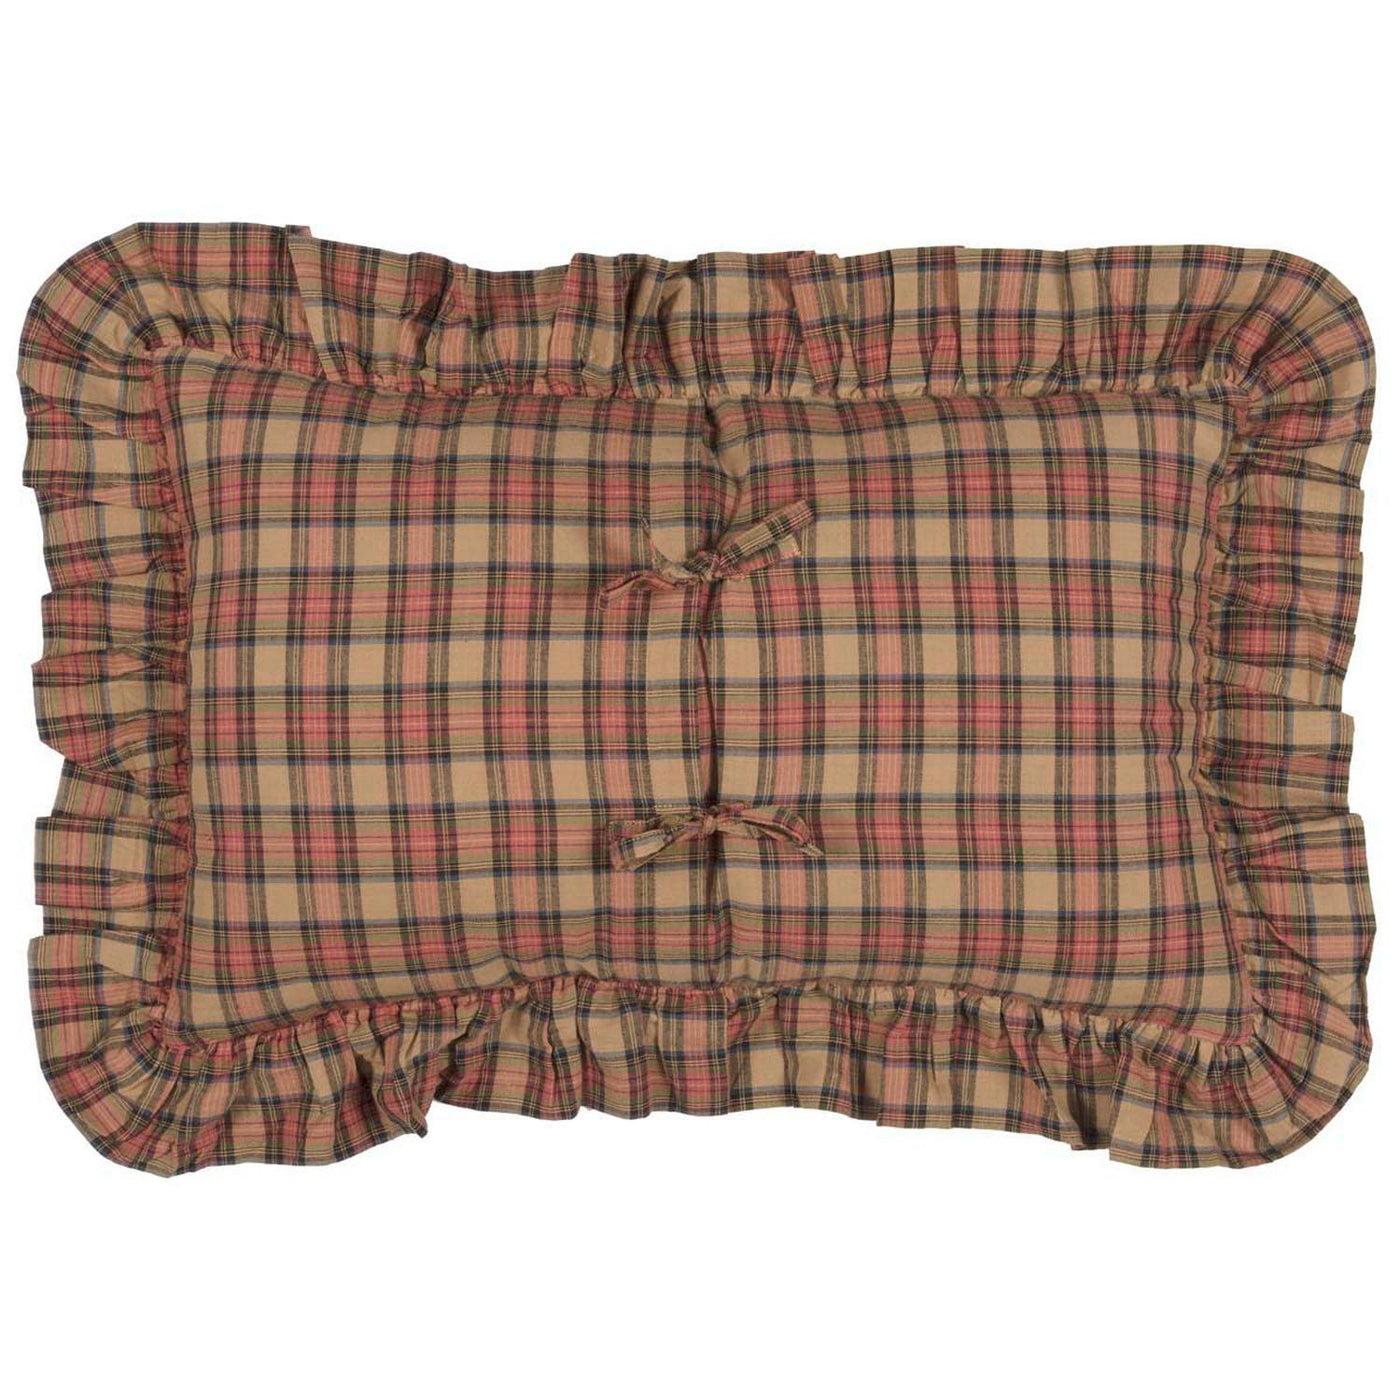 Knightsbridge 14 x 22 Pillow - Natural/Candy Red